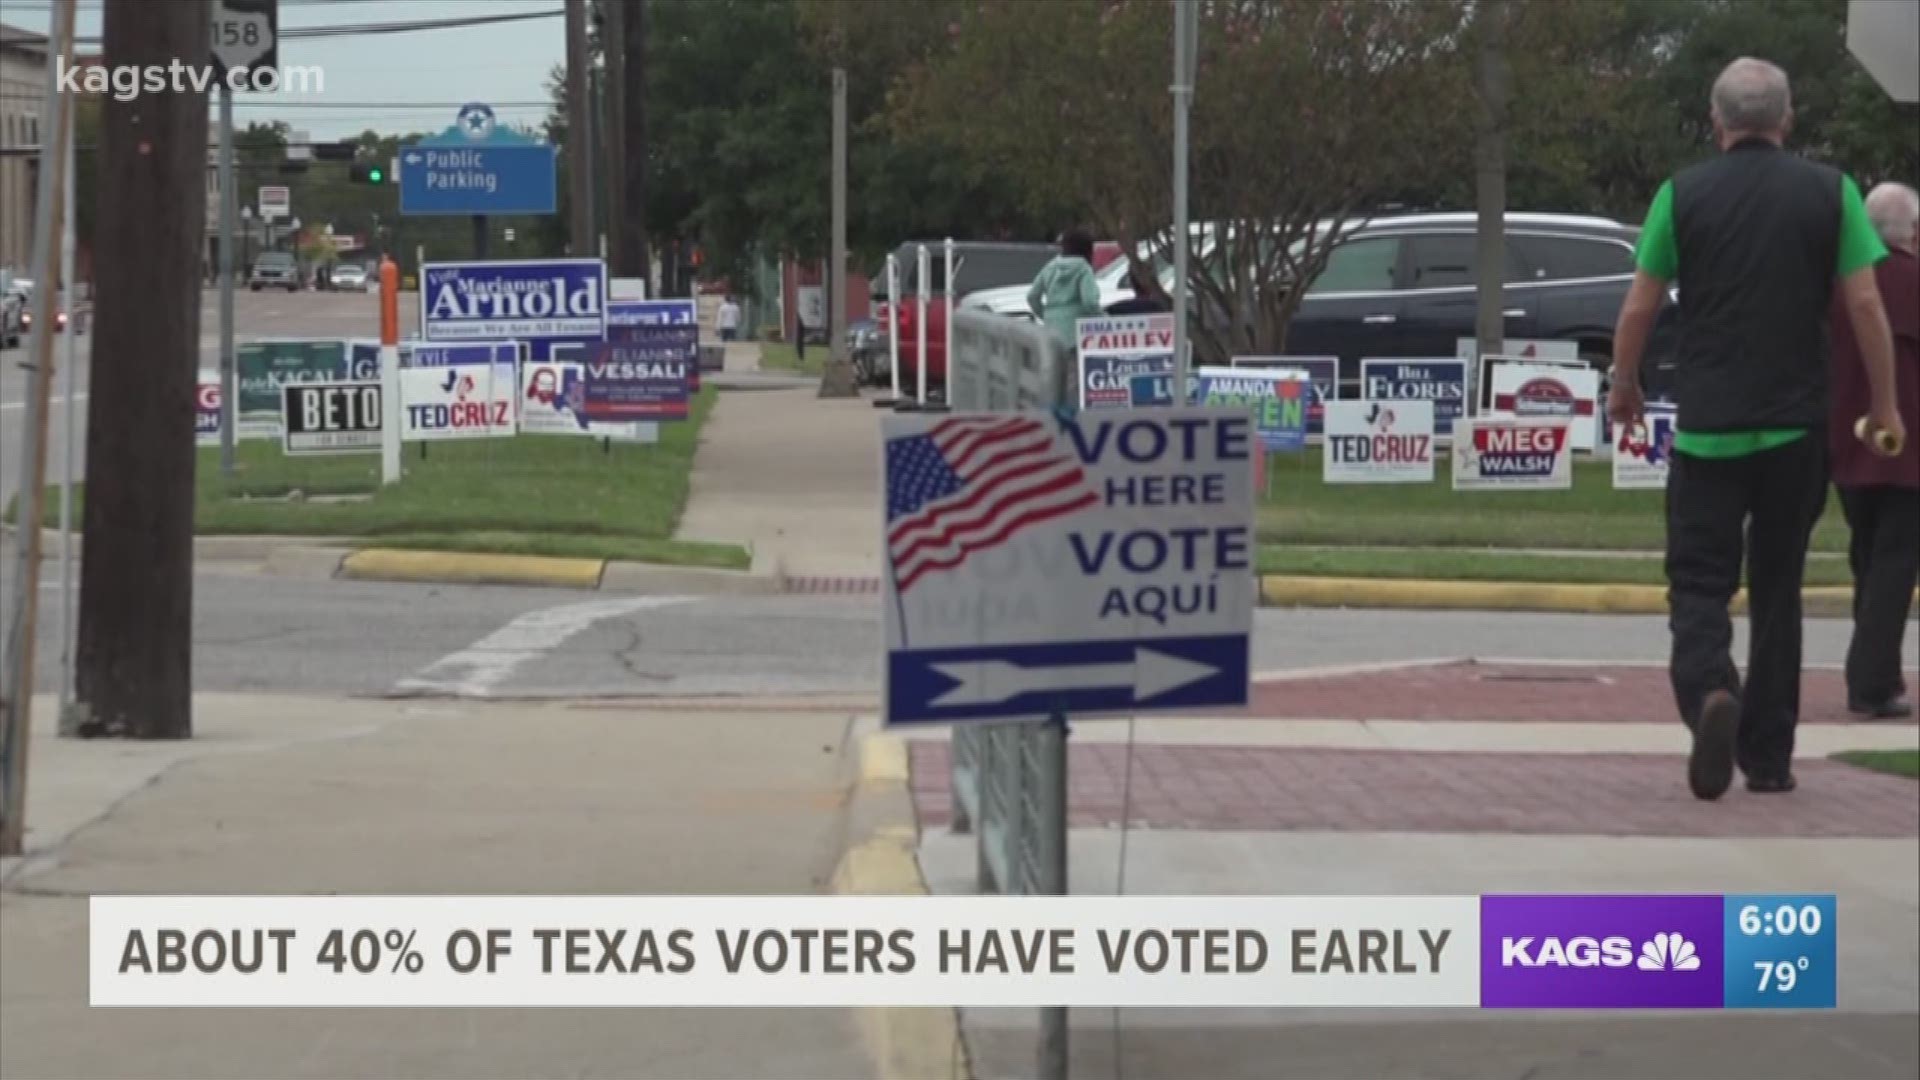 Early voting totals are in as the state gears up for Election Day and the number shows a groundswell o voters beyond the average number of early voters for a midterm race.